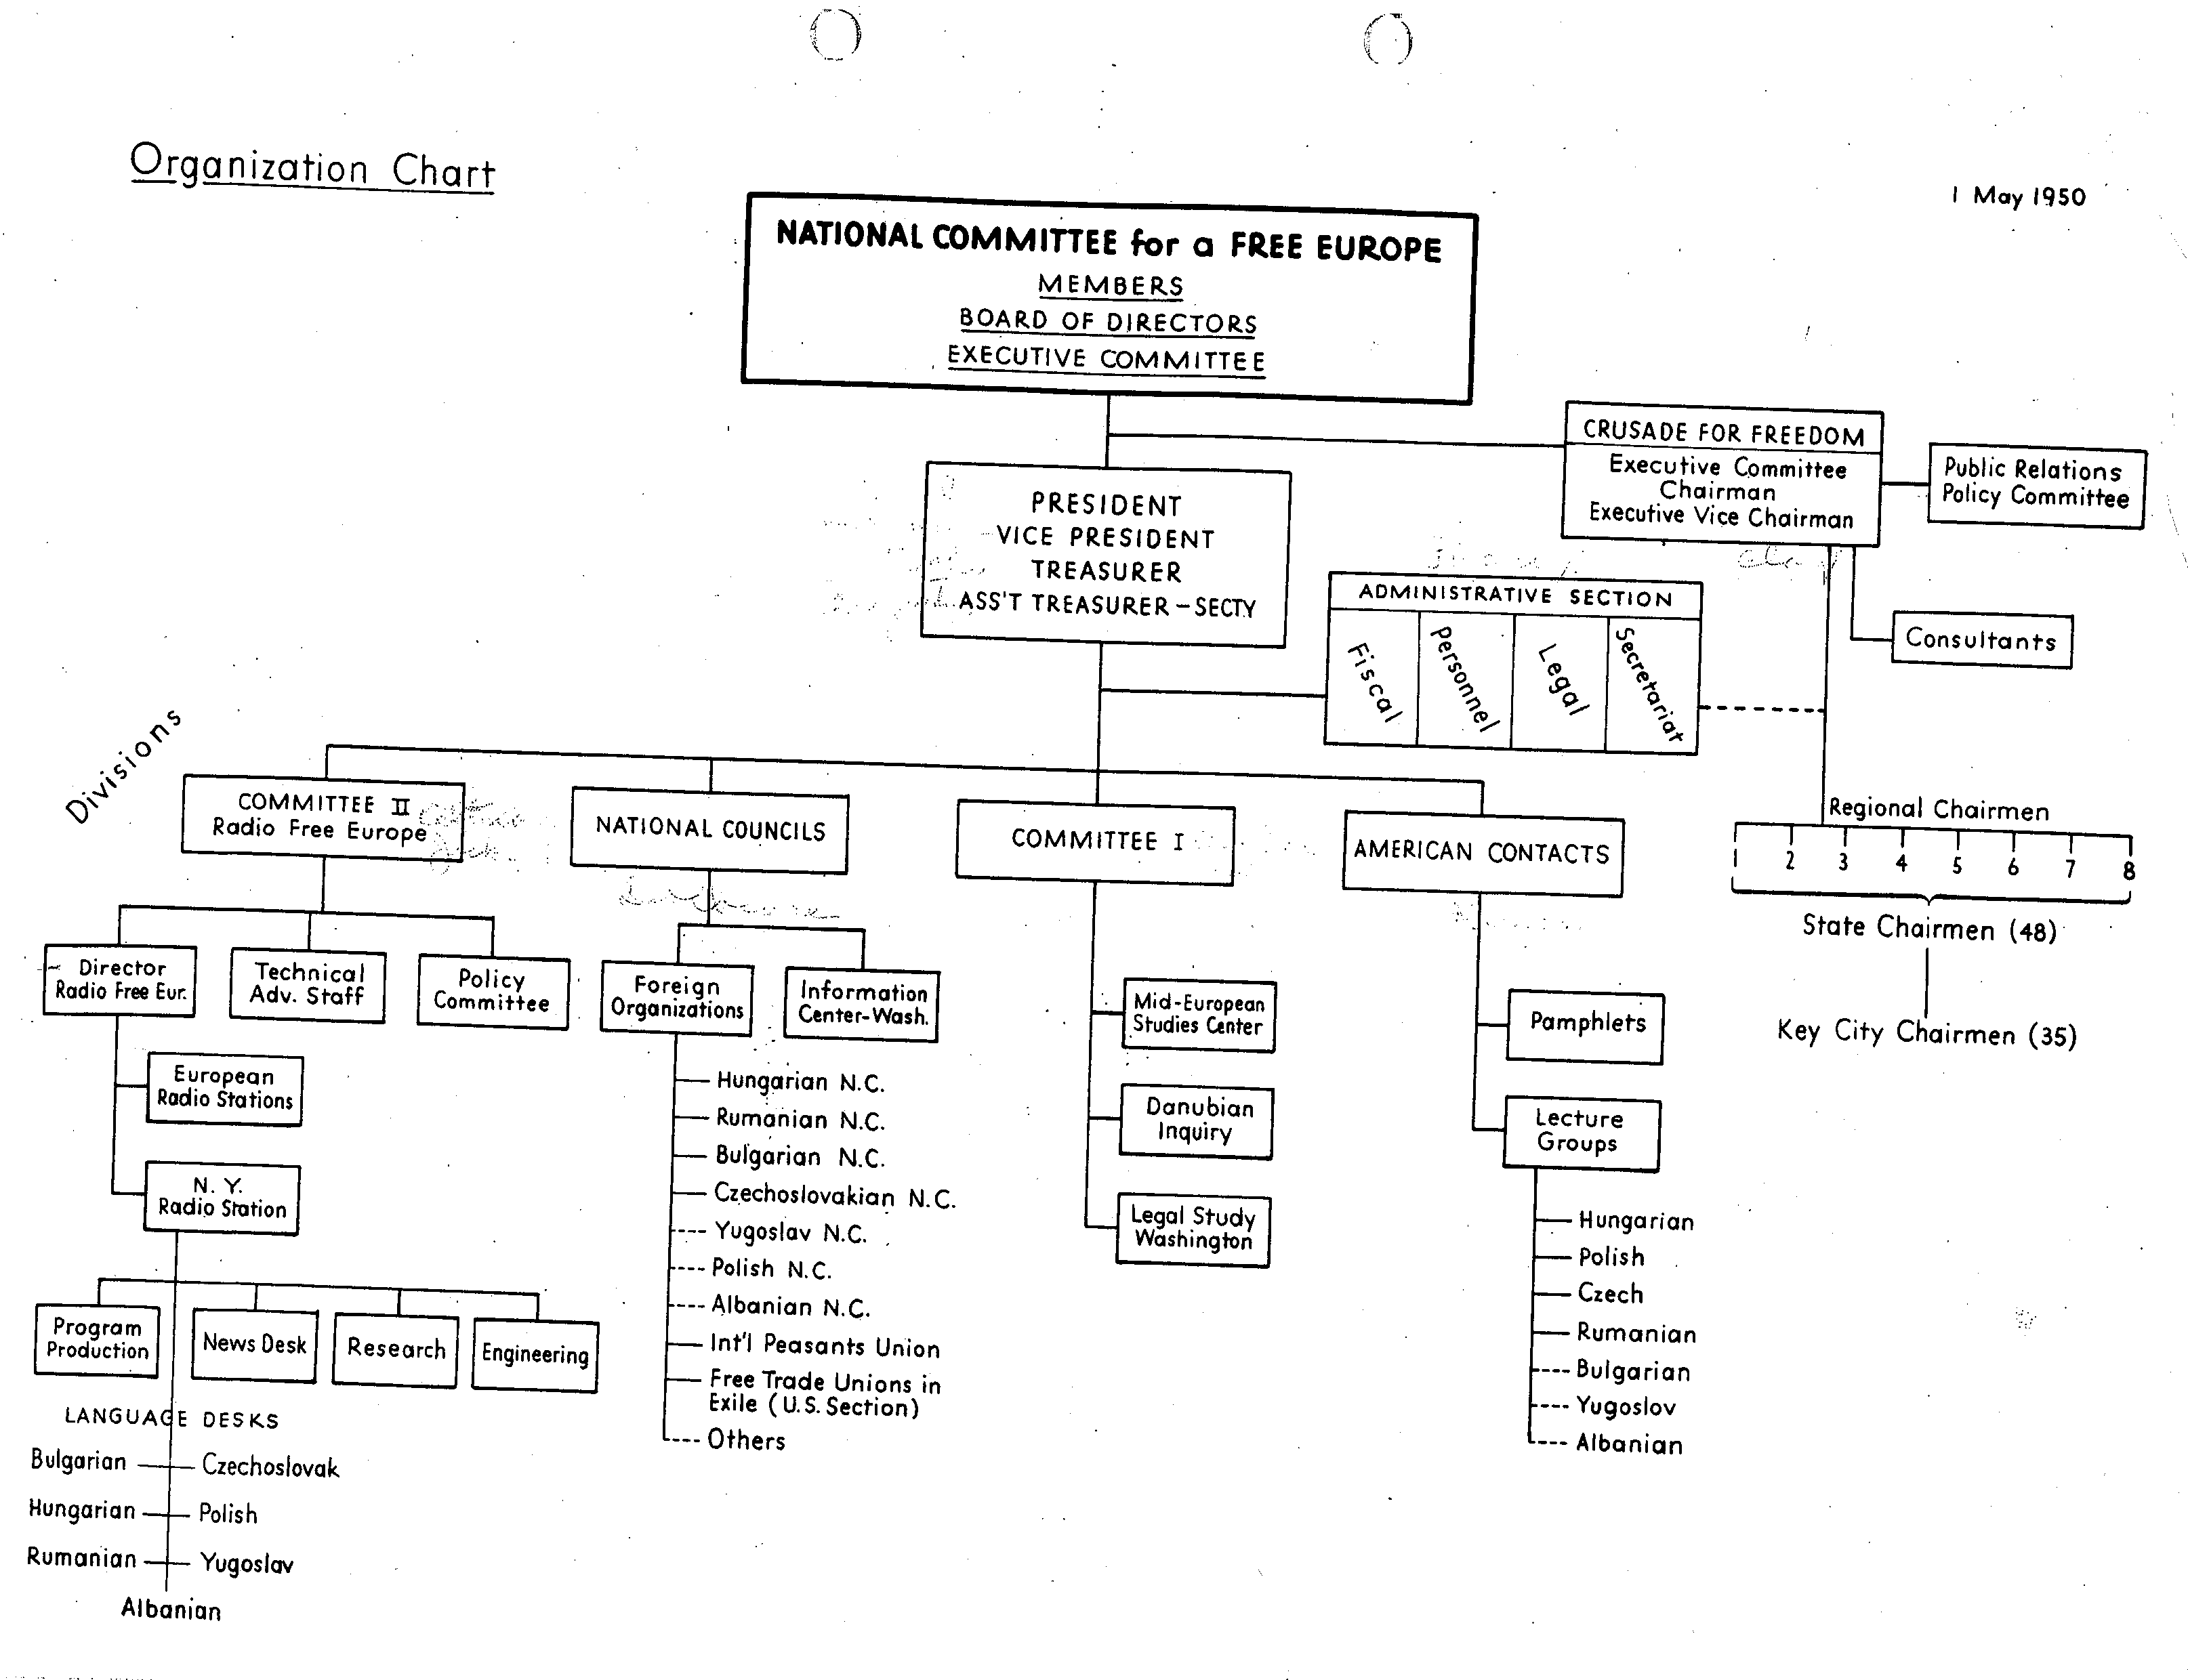 Image of the FEC Organizational Chart, May 1, 1950 (FEC Collection, OSA)